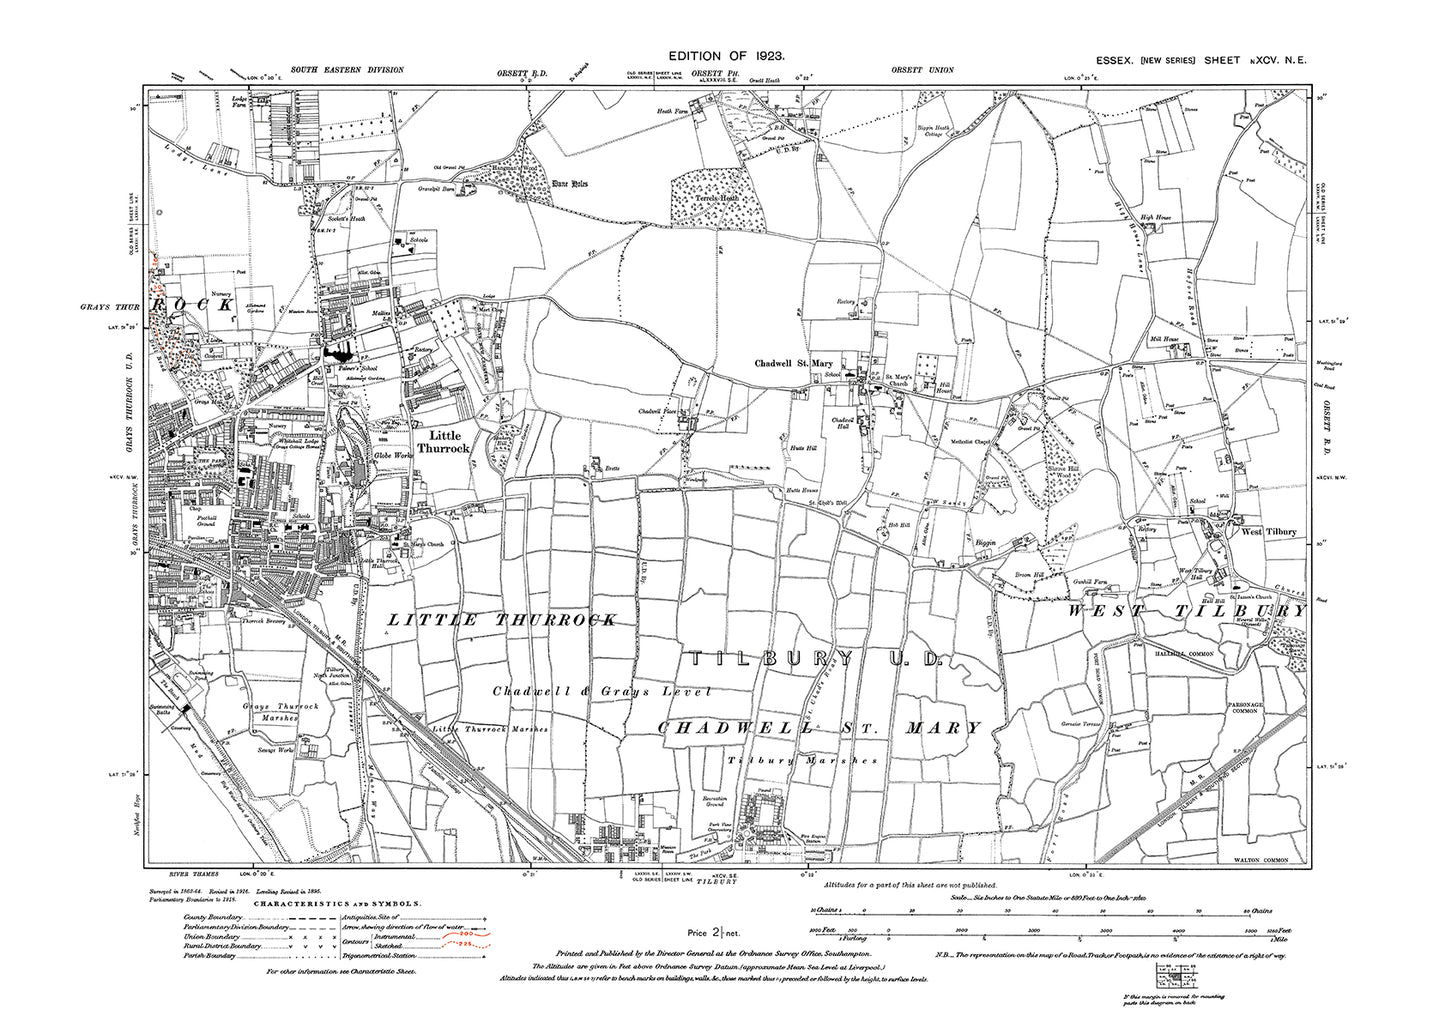 Old OS map dated 1923, showing Little Thurrock, Chadwell St Mary, West Tilbury and Tilbury (north) in Essex - 95NE